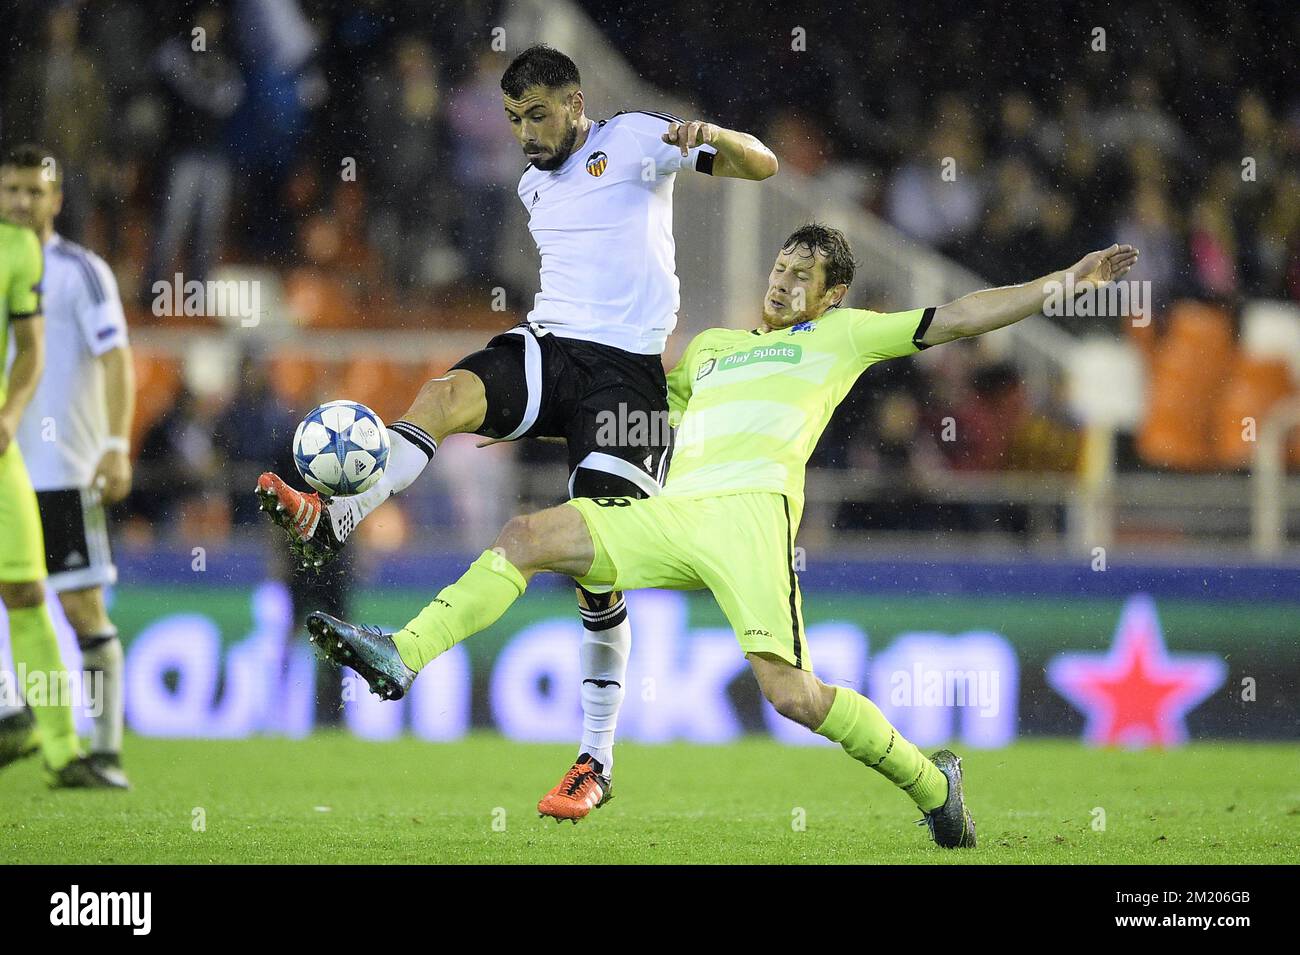 20151020 - VALENCIA, SPAIN: Valencia's Javi Fuego and Gent's Thomas Matton fight for the ball during a soccer game between Spanish club Valencia CF and Belgian team KAA Gent in Valencia, Spain, Tuesday 20 October 2015, game three in group H of the group stage of the UEFA Champions League tournament. BELGA PHOTO YORICK JANSENS Stock Photo